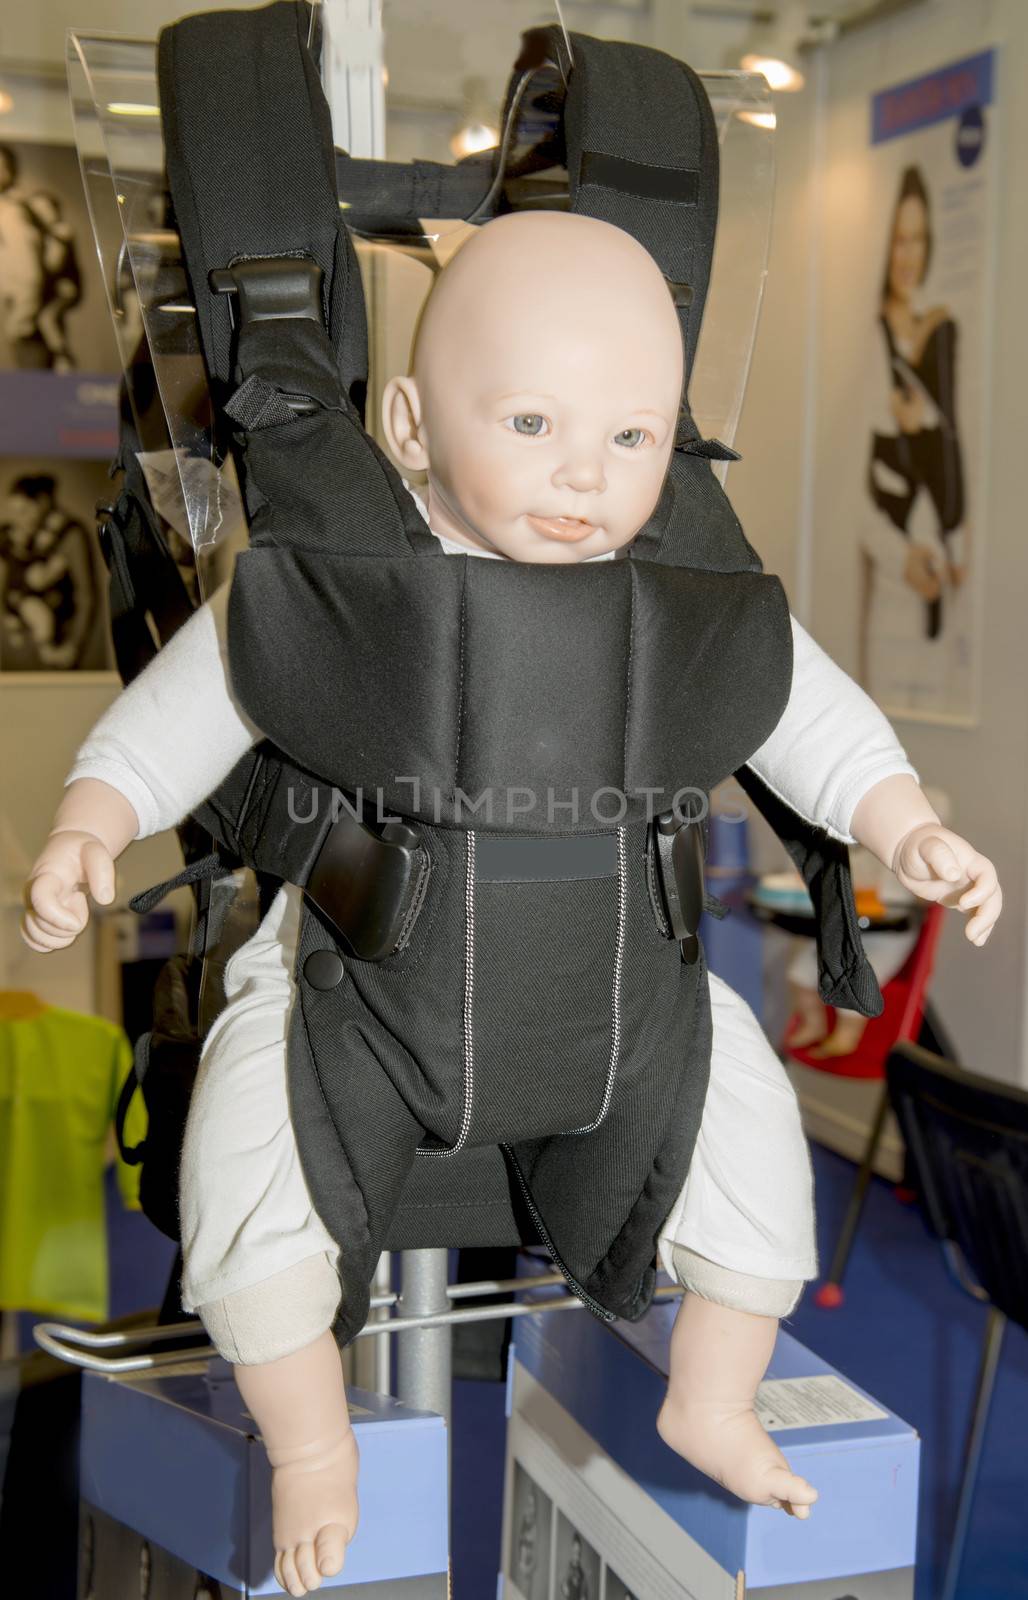 New model of baby carrier in the shop of accessories for children